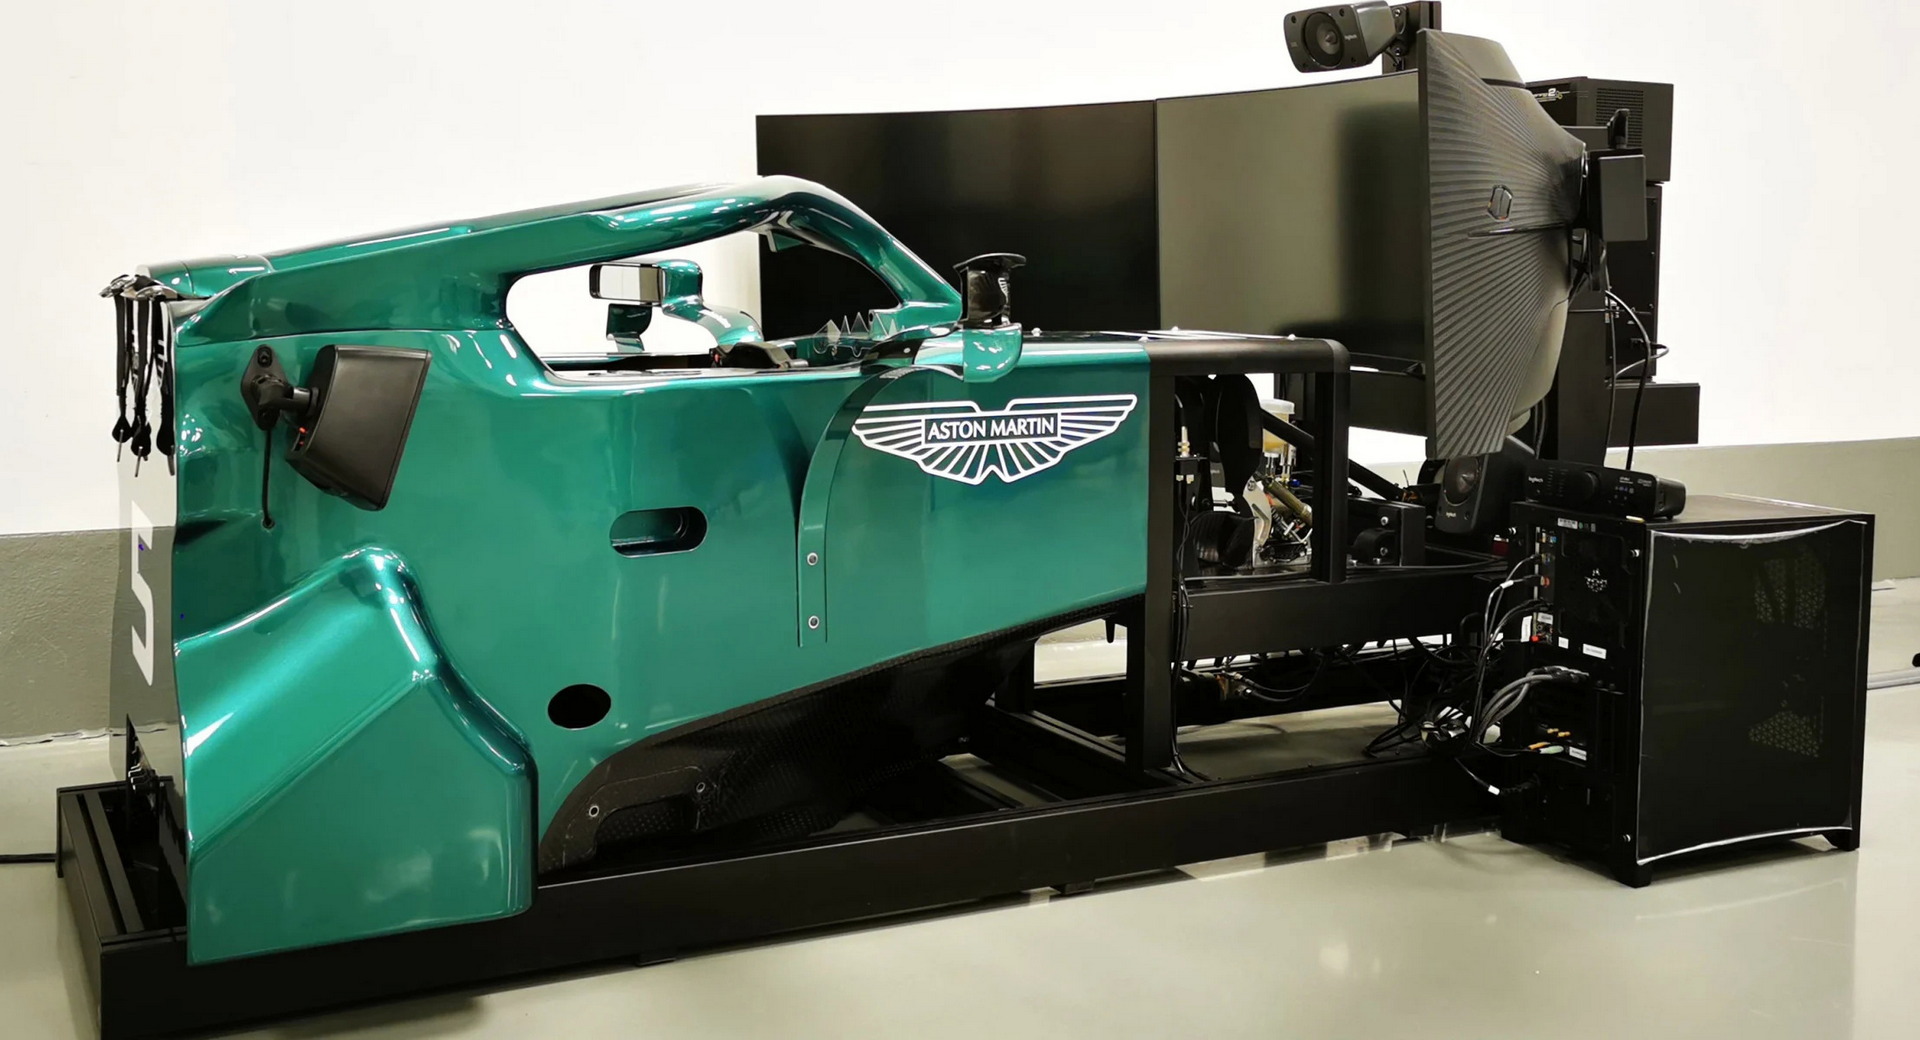 Inside the racing simulators drivers use for realistic training